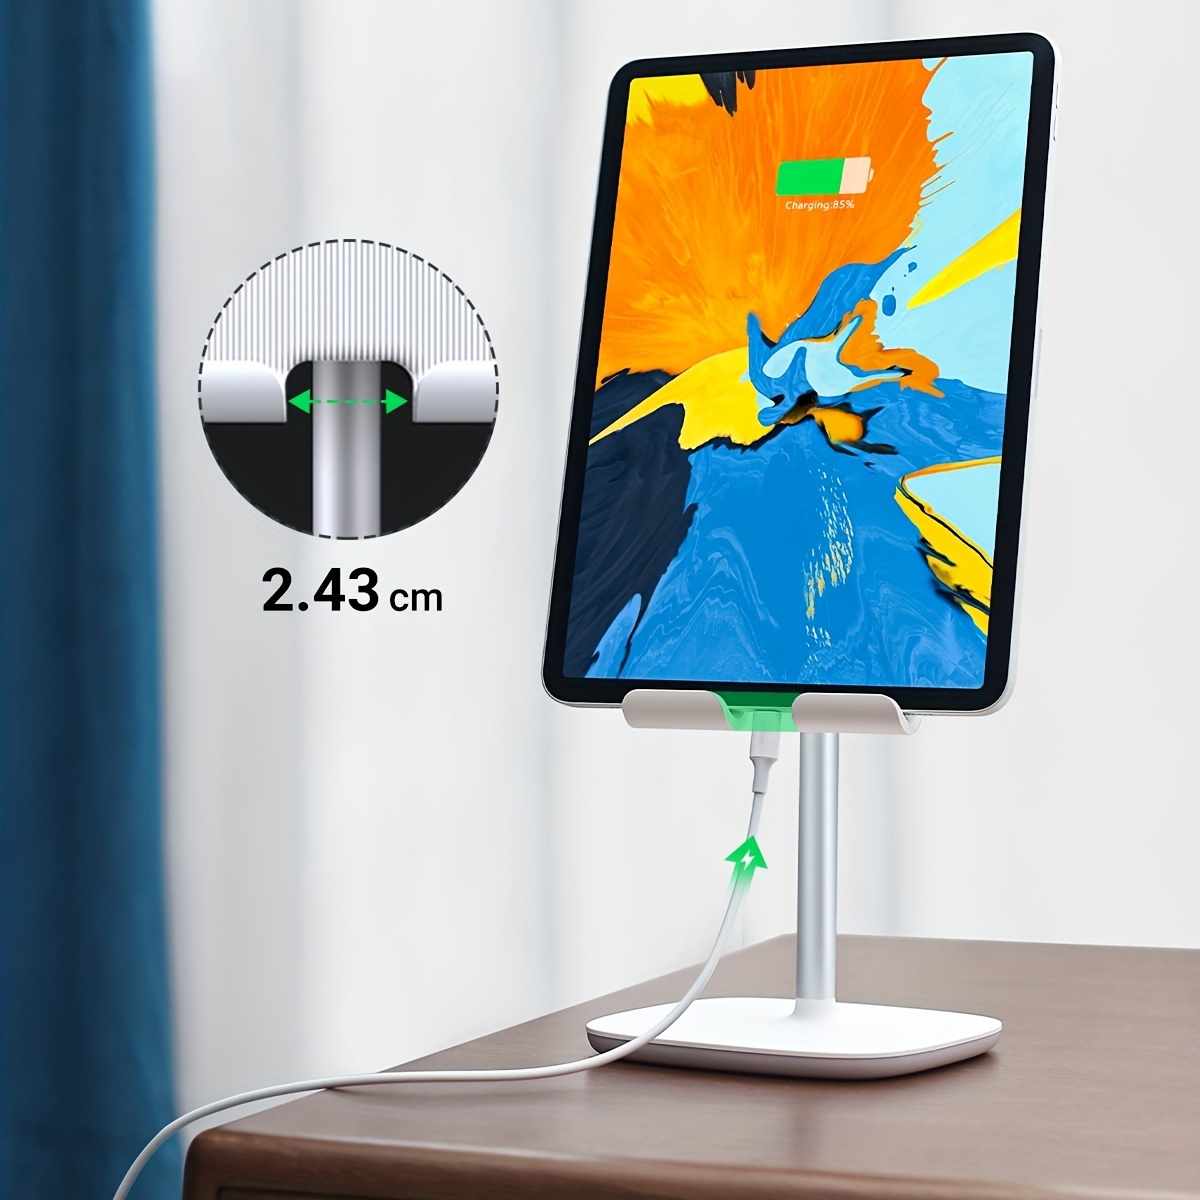 Lamicall Tablet Stand, Adjustable Tablet Holder - Universal Stand Holder  for iPad Pro 12.9, 11, 10.5, 9.7, iPad Air mini 2, 3, 4, Switch, Samsung  Tab